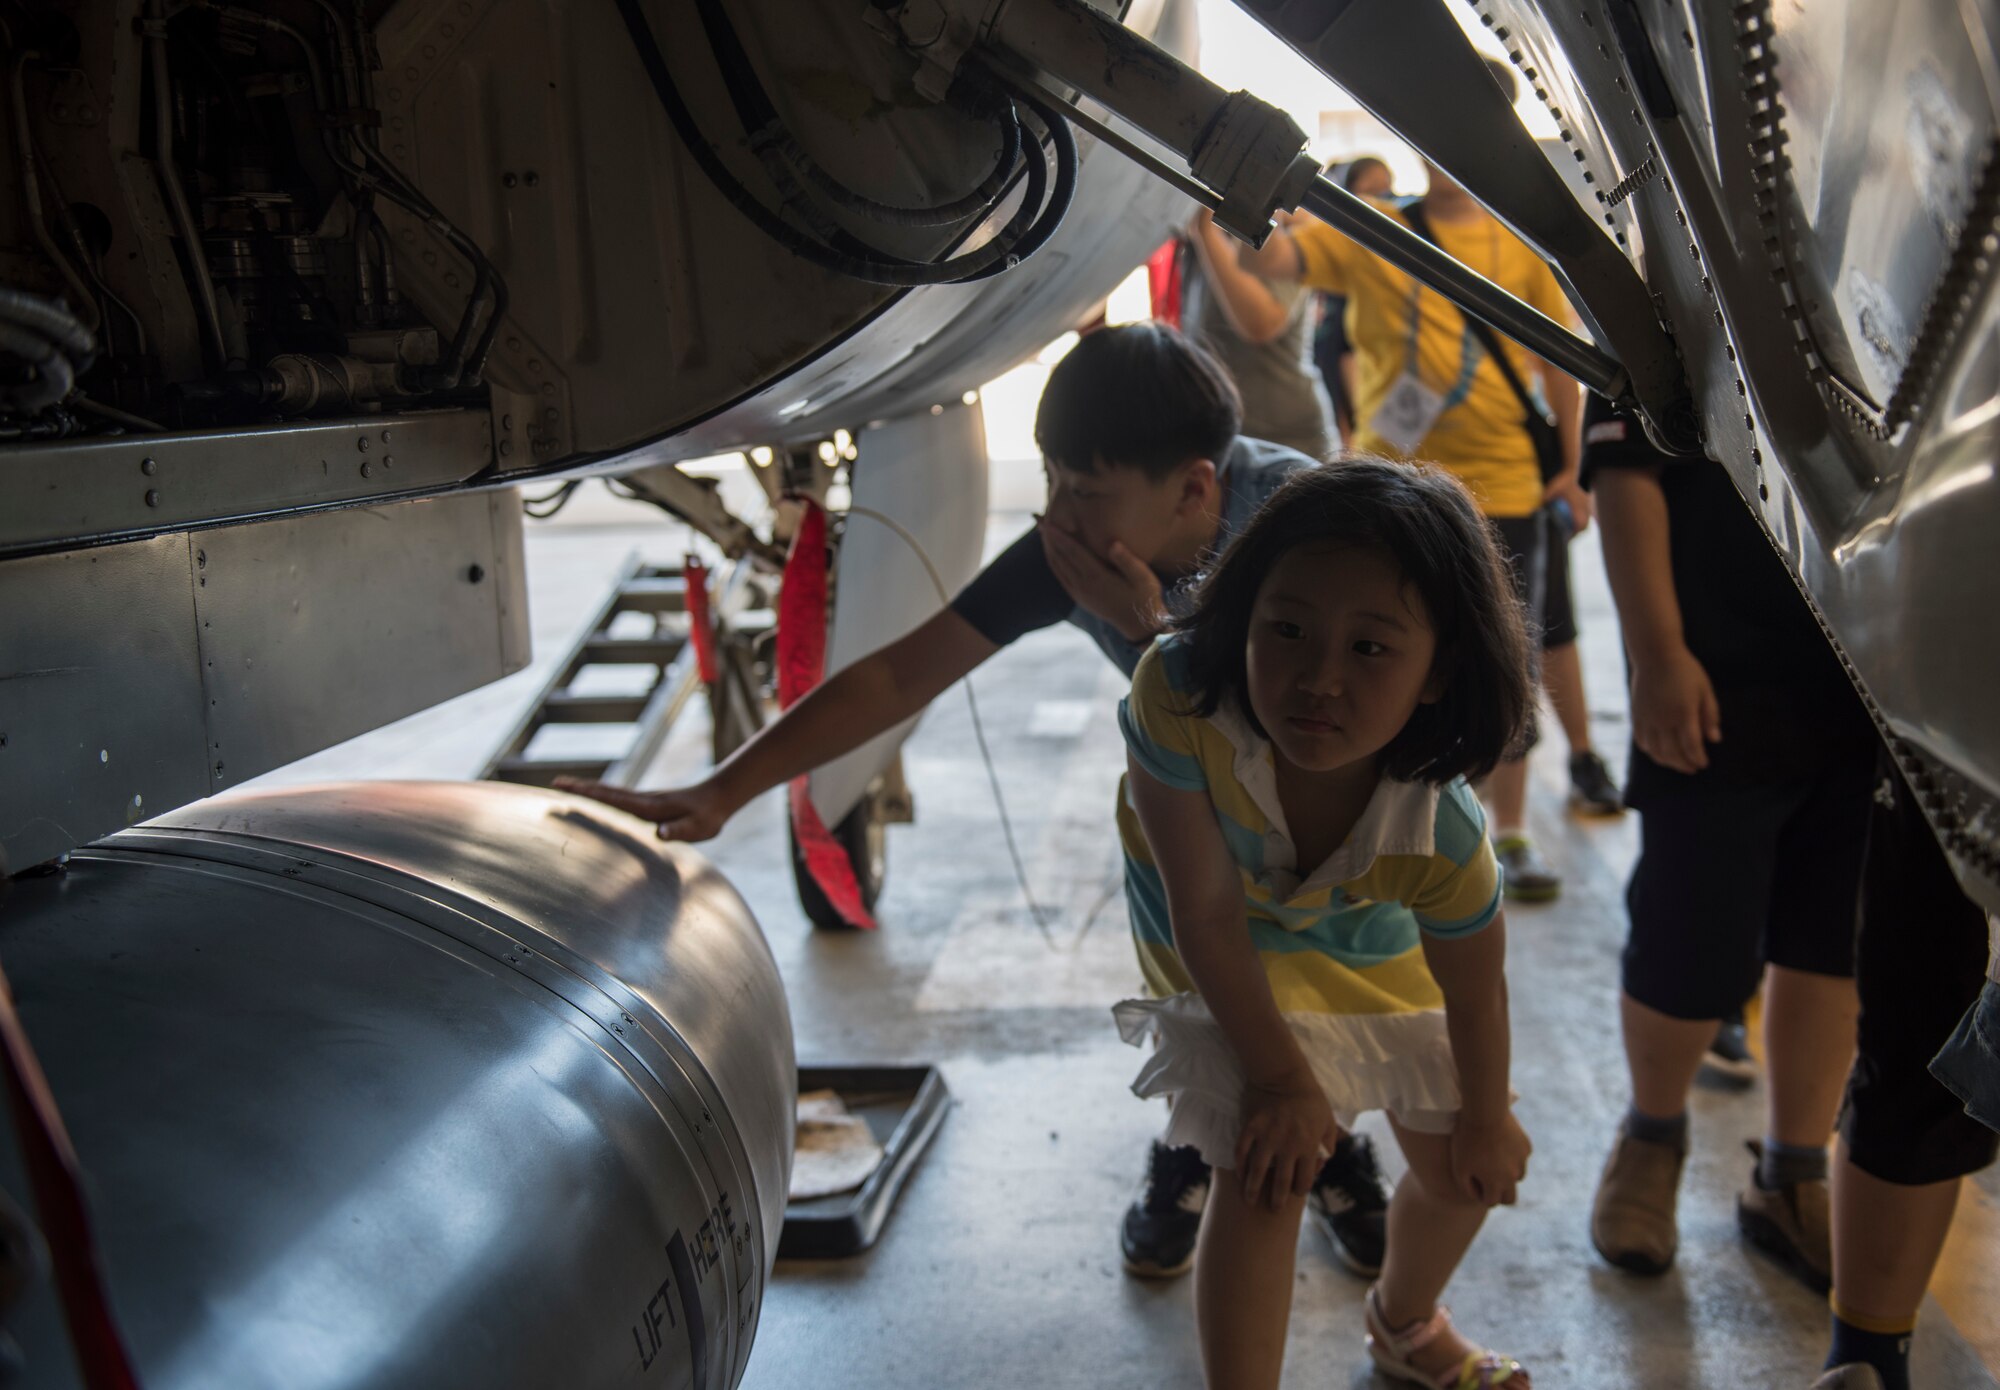 Korean children from the local area examine an F-16 Fighting Falcon during a tour at Kunsan Air Base, Republic of Korea, Aug. 2, 2019. The tour ended with the children getting up close and personal with one of the 8th Fighter Wing’s aircraft, and a demonstration from the 8th Aircraft Maintenance Squadron on loading the F-16. (U.S. Air Force photo by Senior Airman Stefan Alvarez)